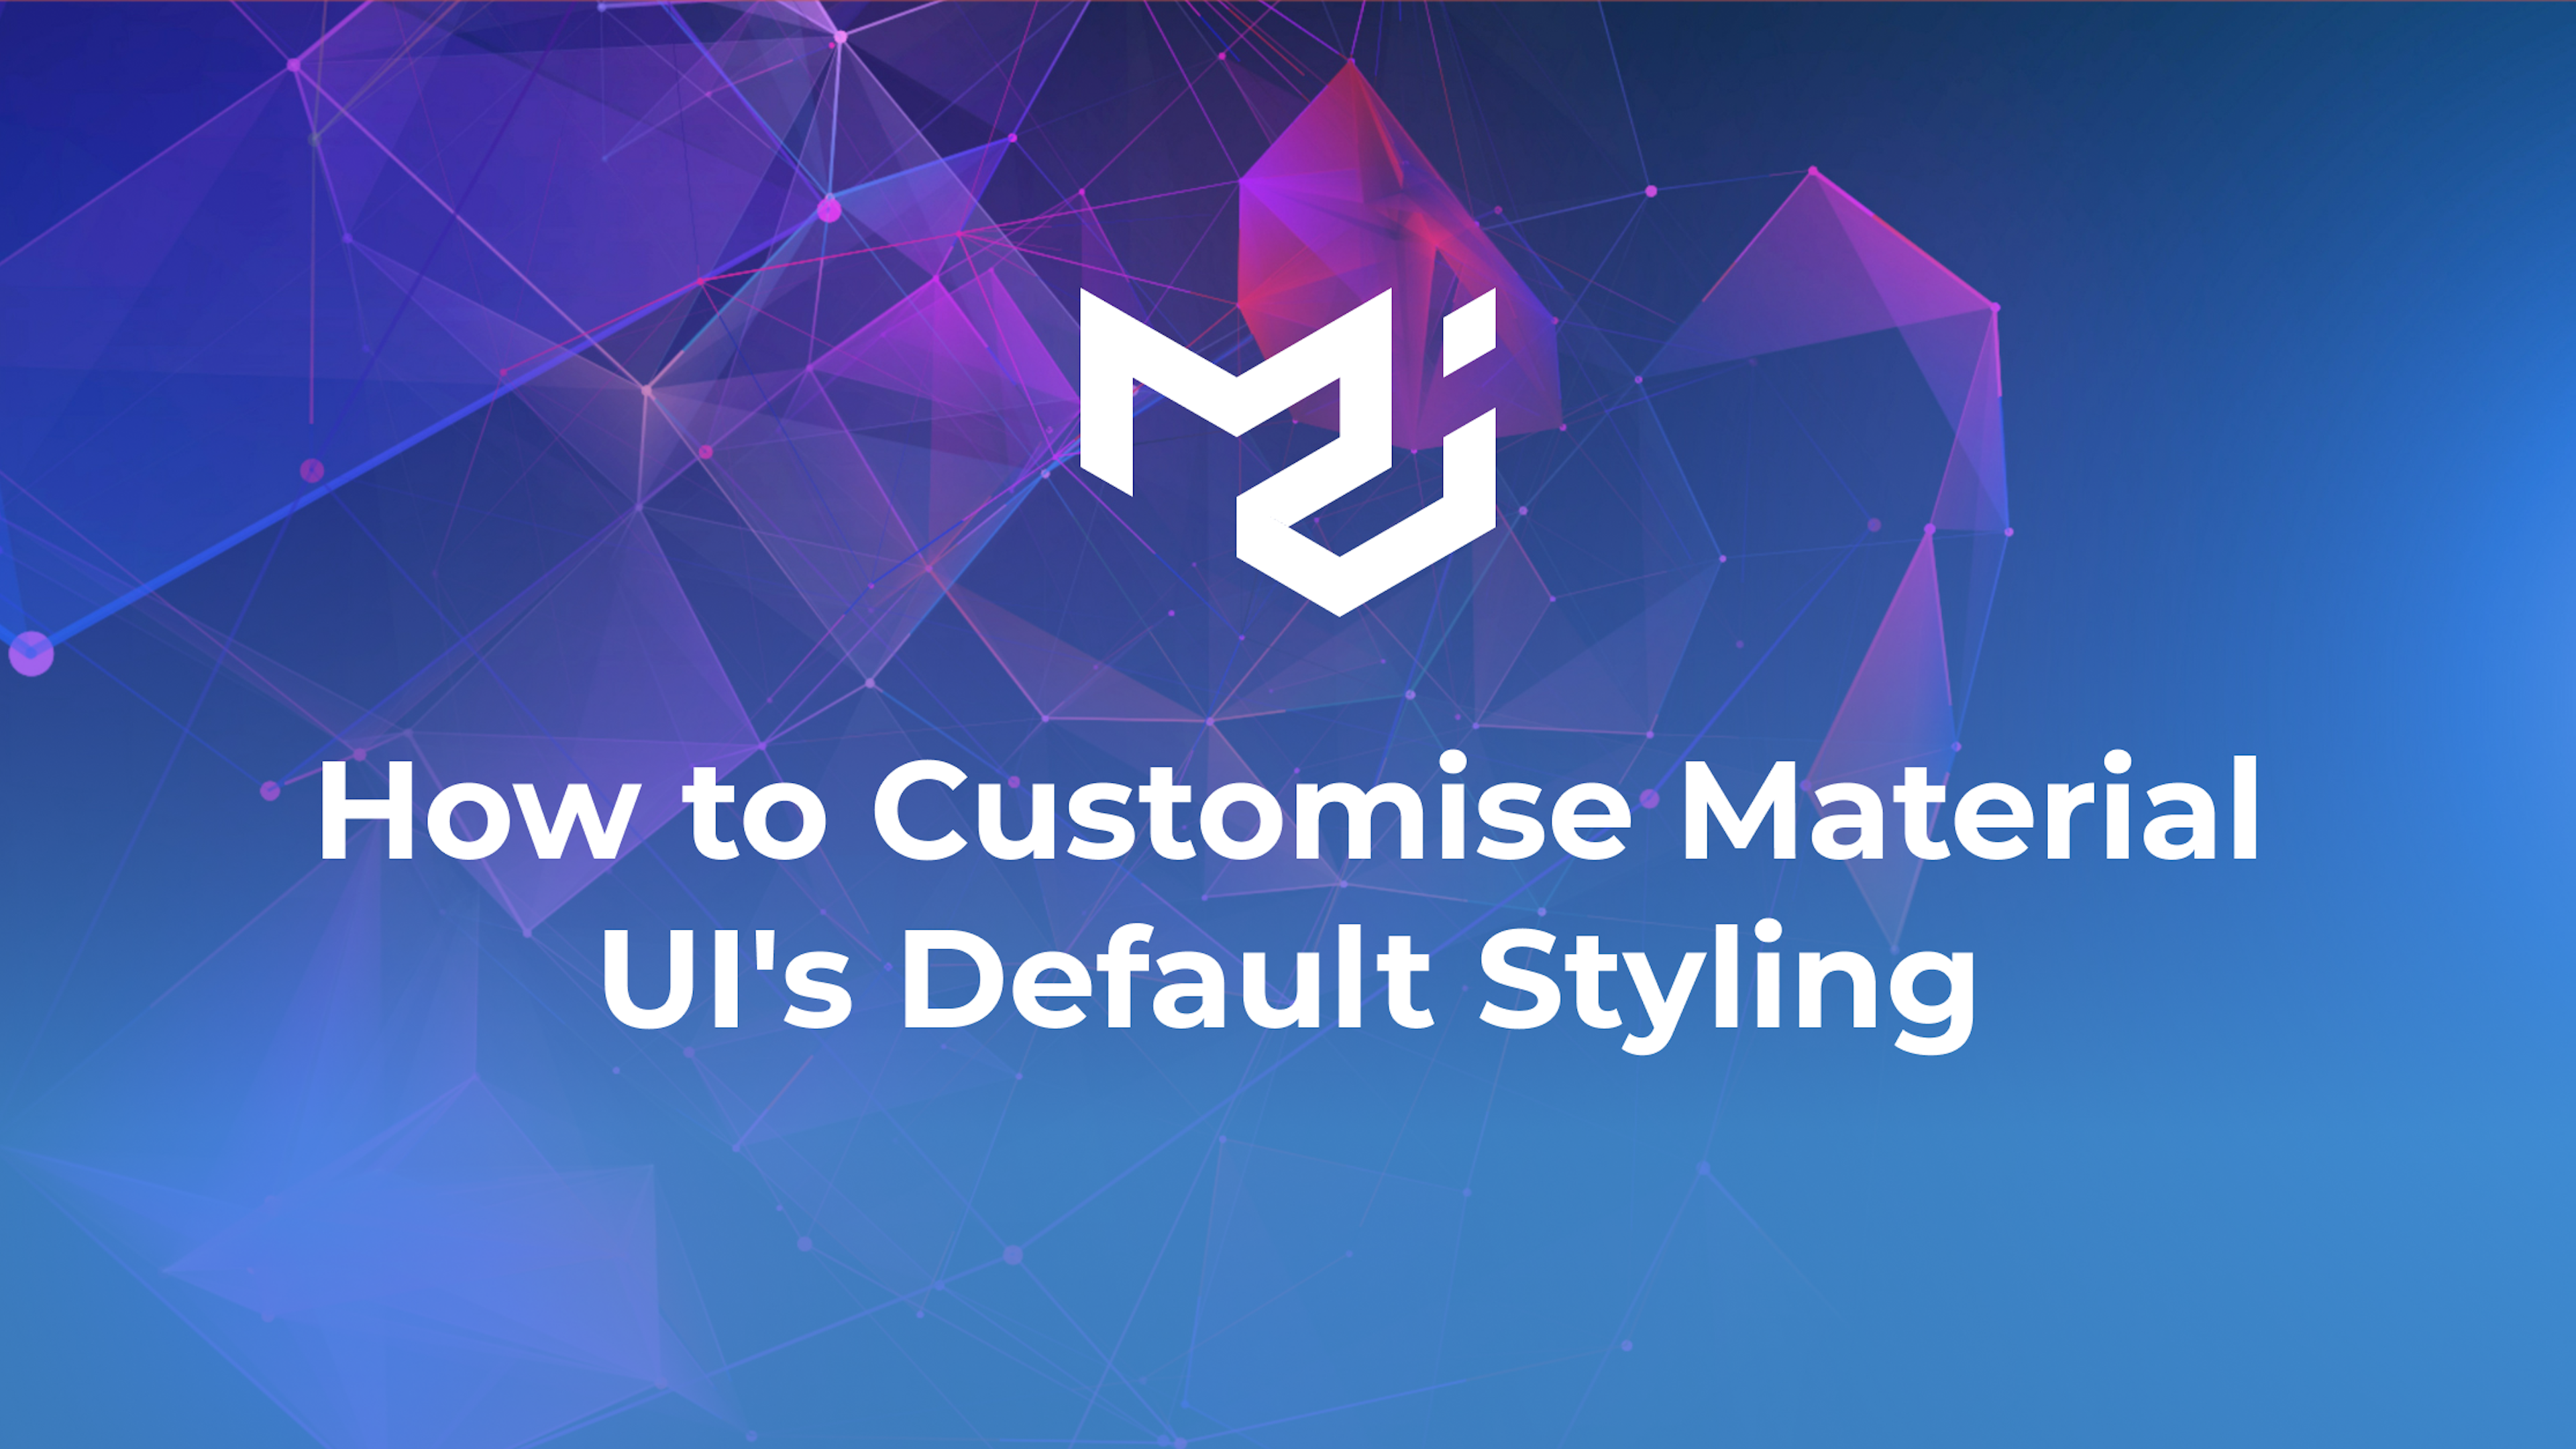 How to Customise Material UI's Default Styling